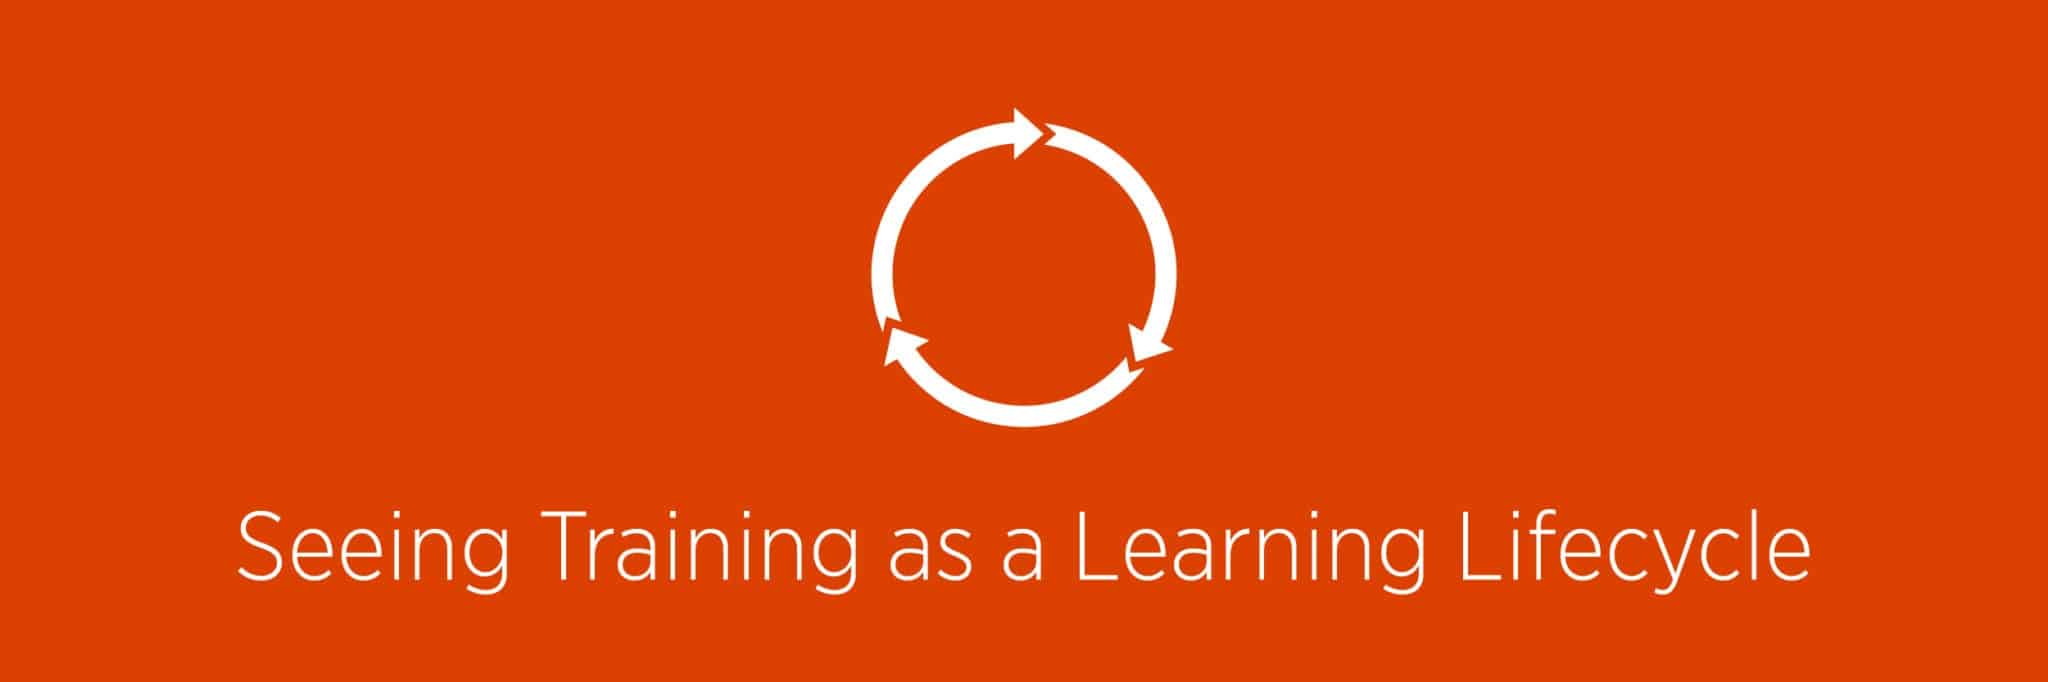 Training should be a learning lifecycle